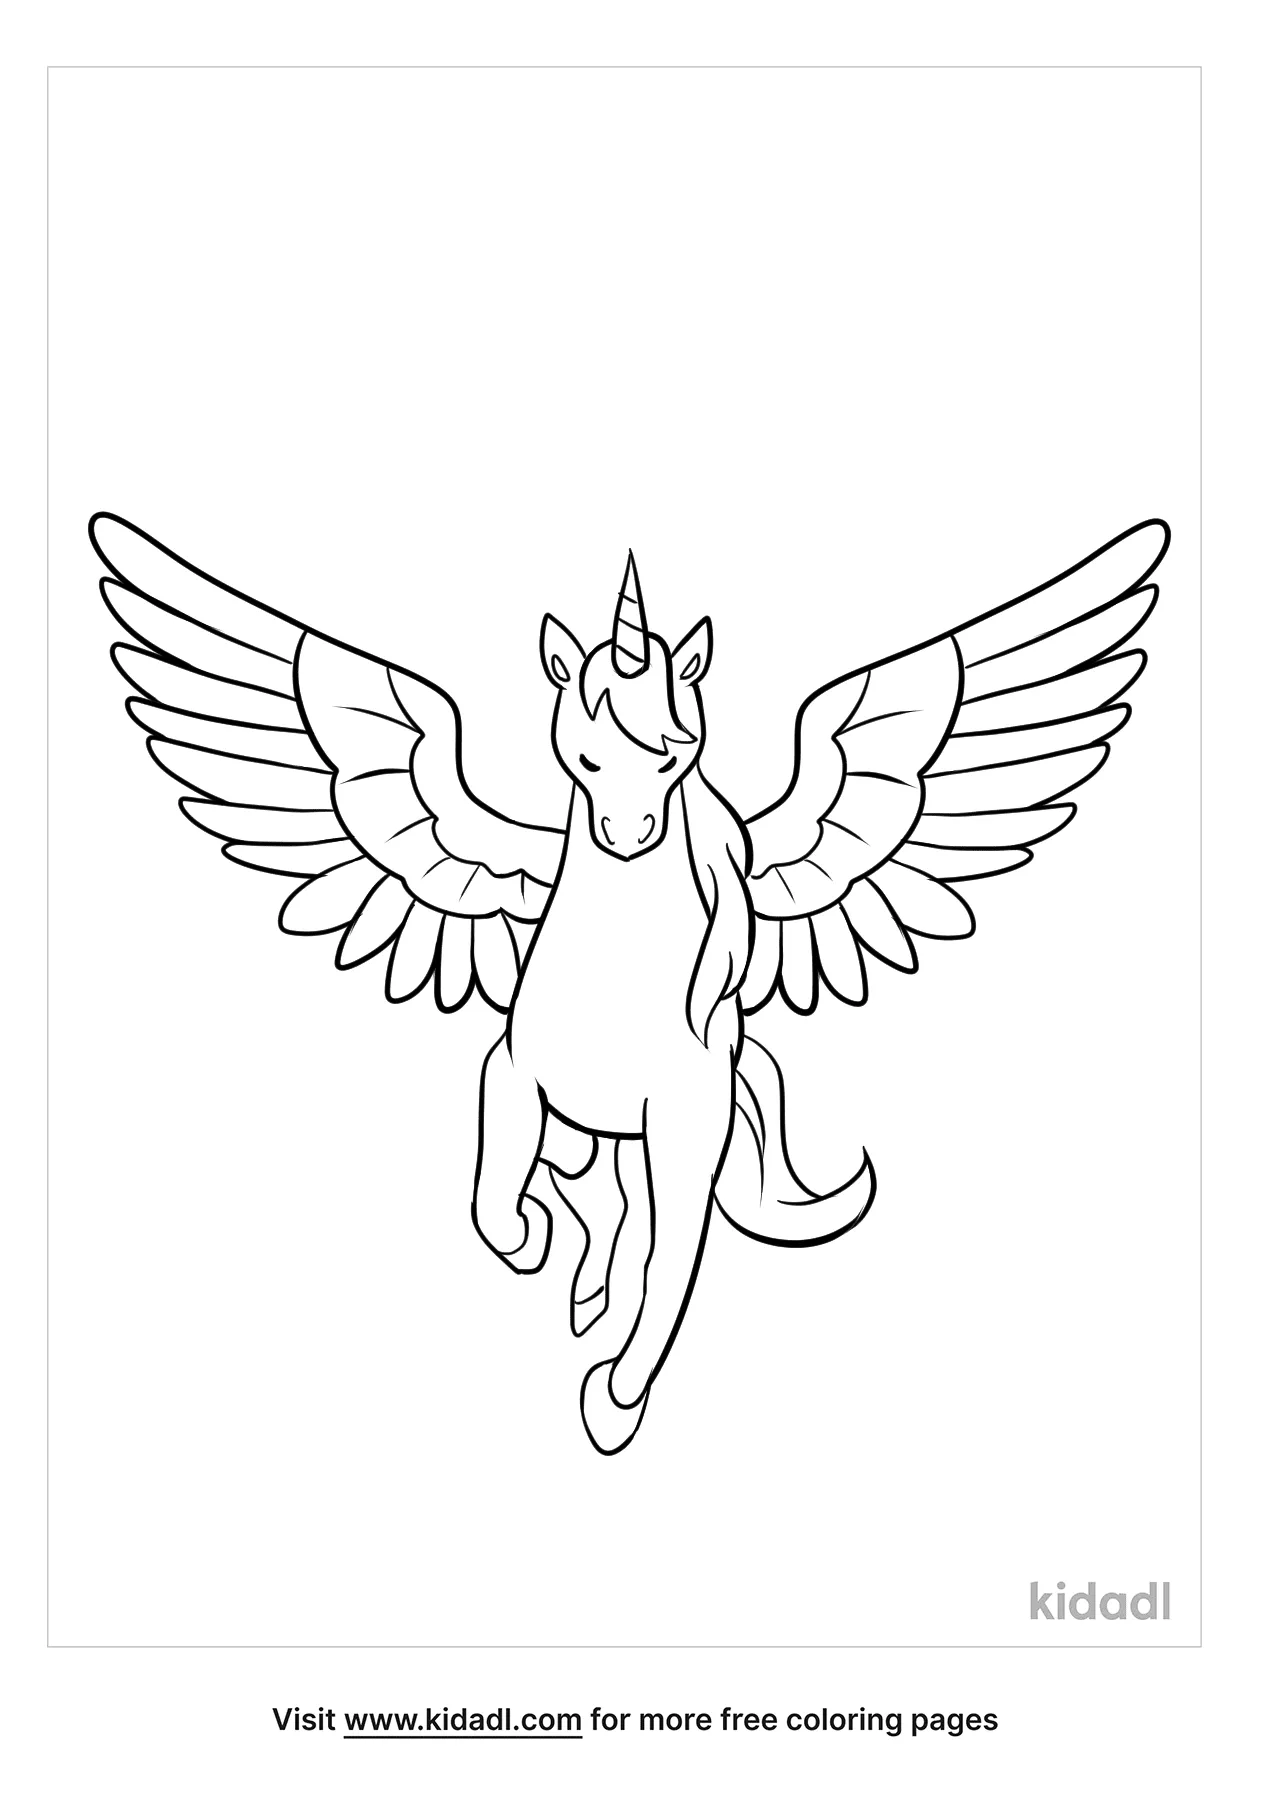 Alicorn Coloring Pages Free Unicorns Coloring Pages Kidadl